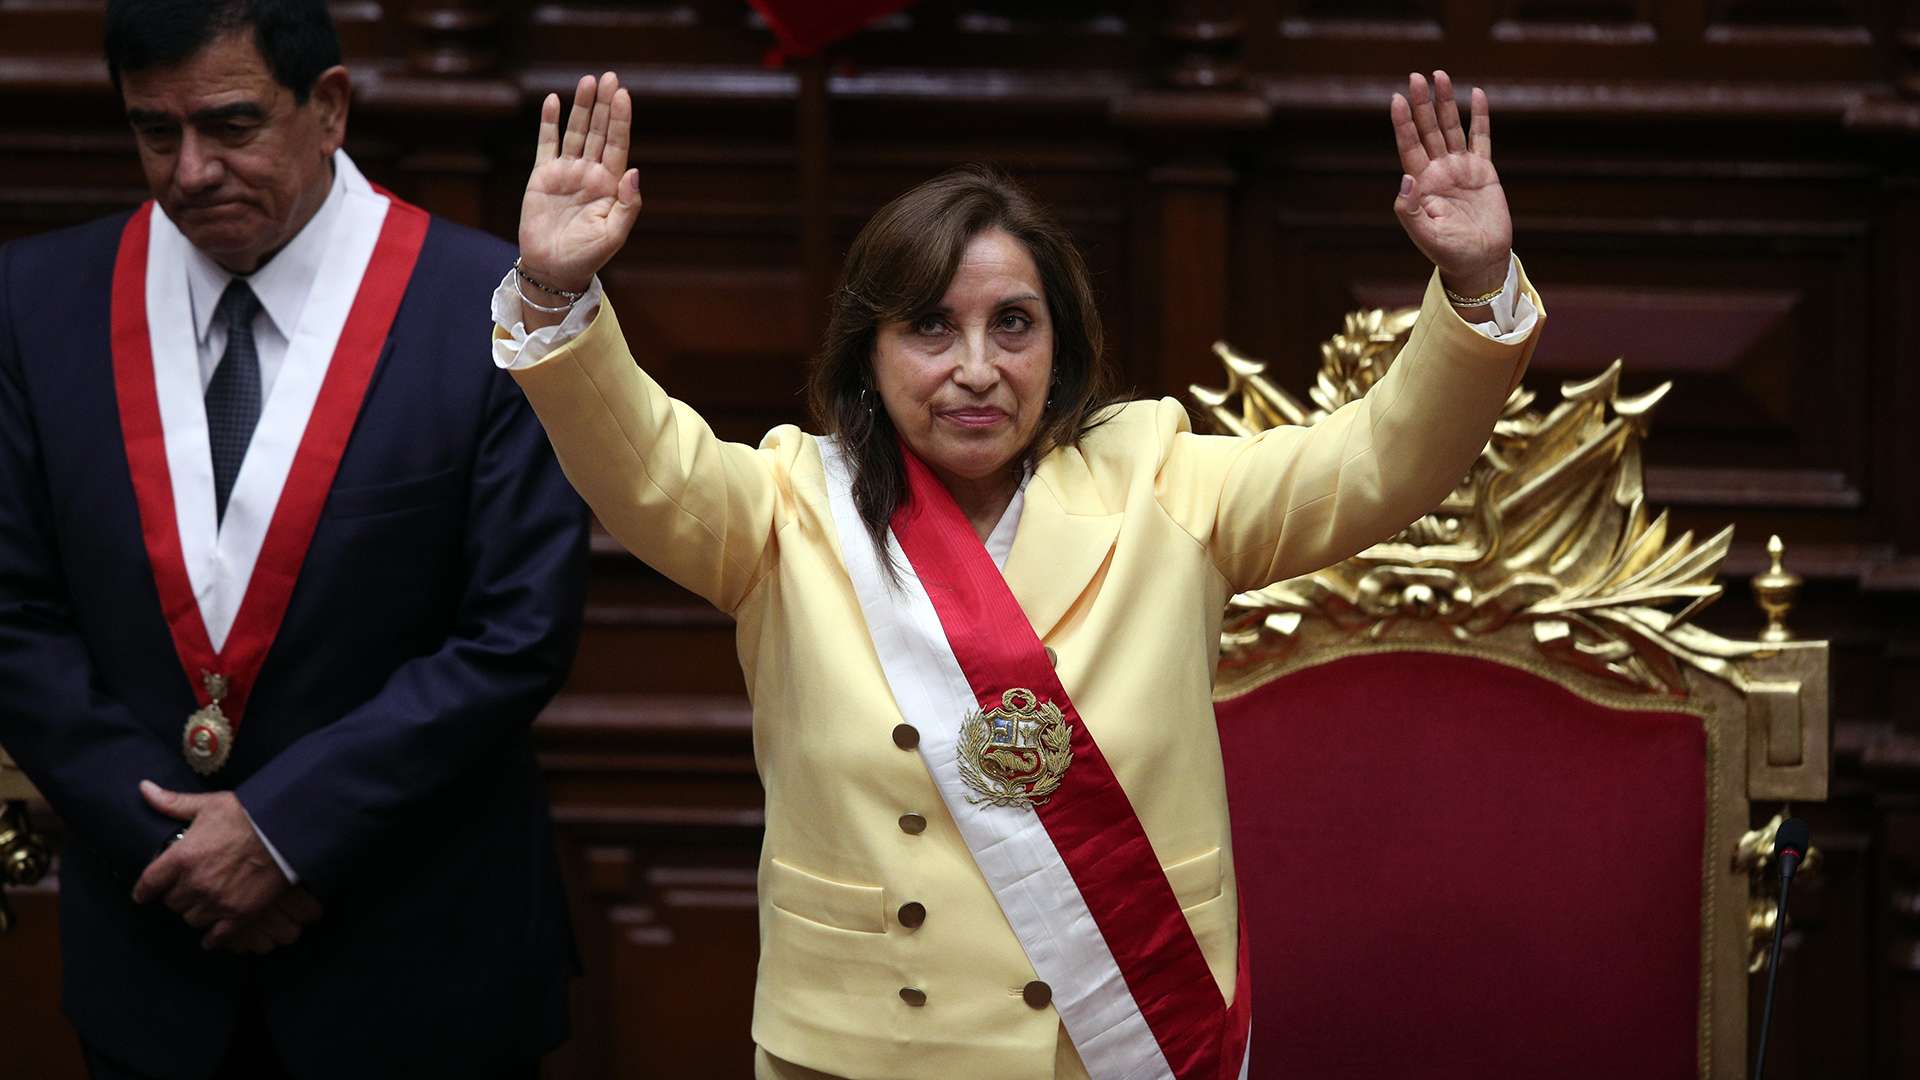 Peruvian President tries to dissolve Congress, is dismissed and ends up in custody